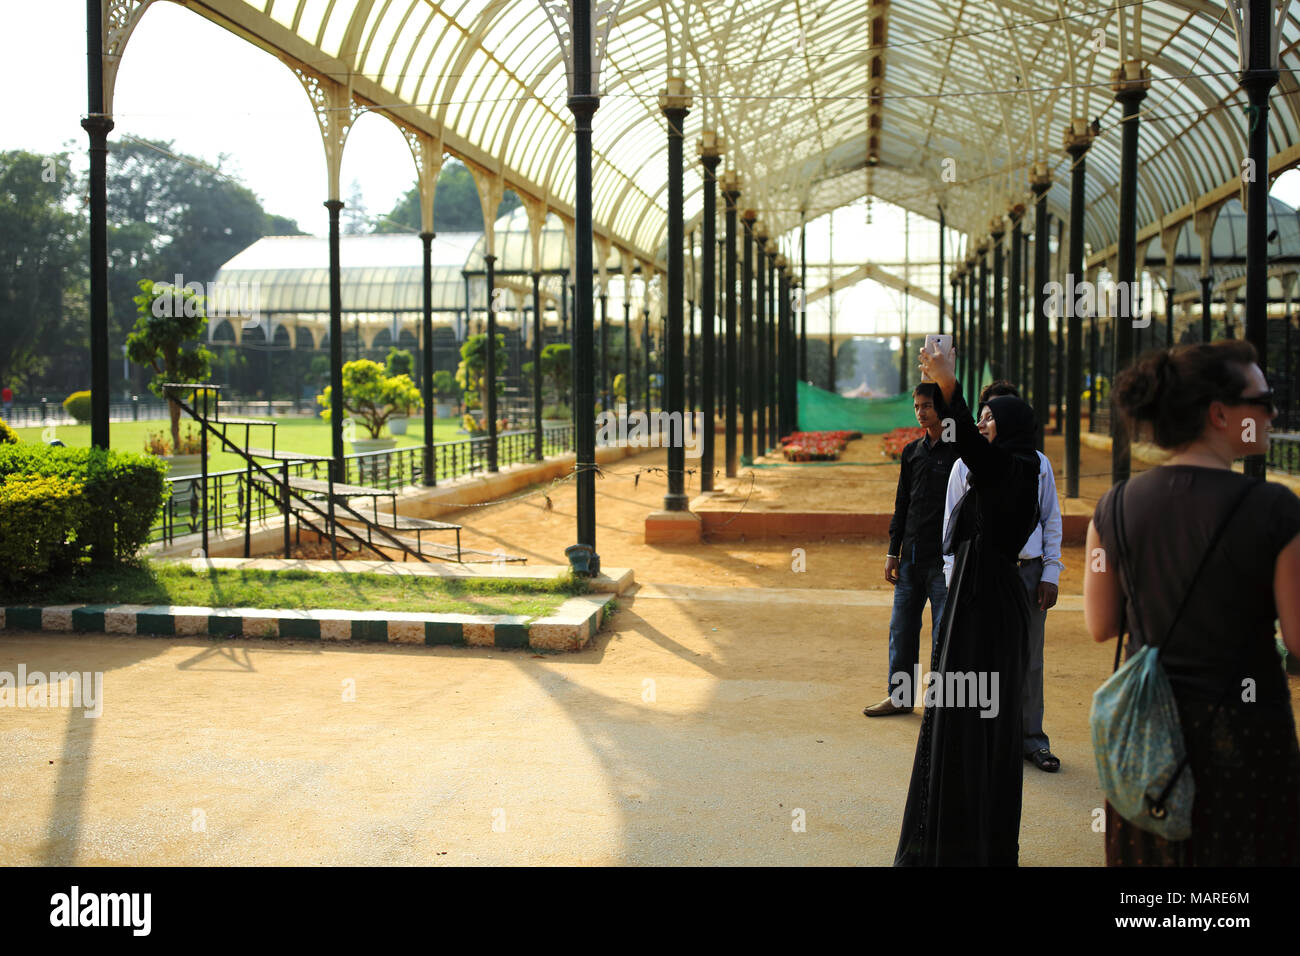 Bangalore, India - October 15, 2016: Tourists visits the botanical garden 'Lalbagh', The Red Garden in English. Stock Photo